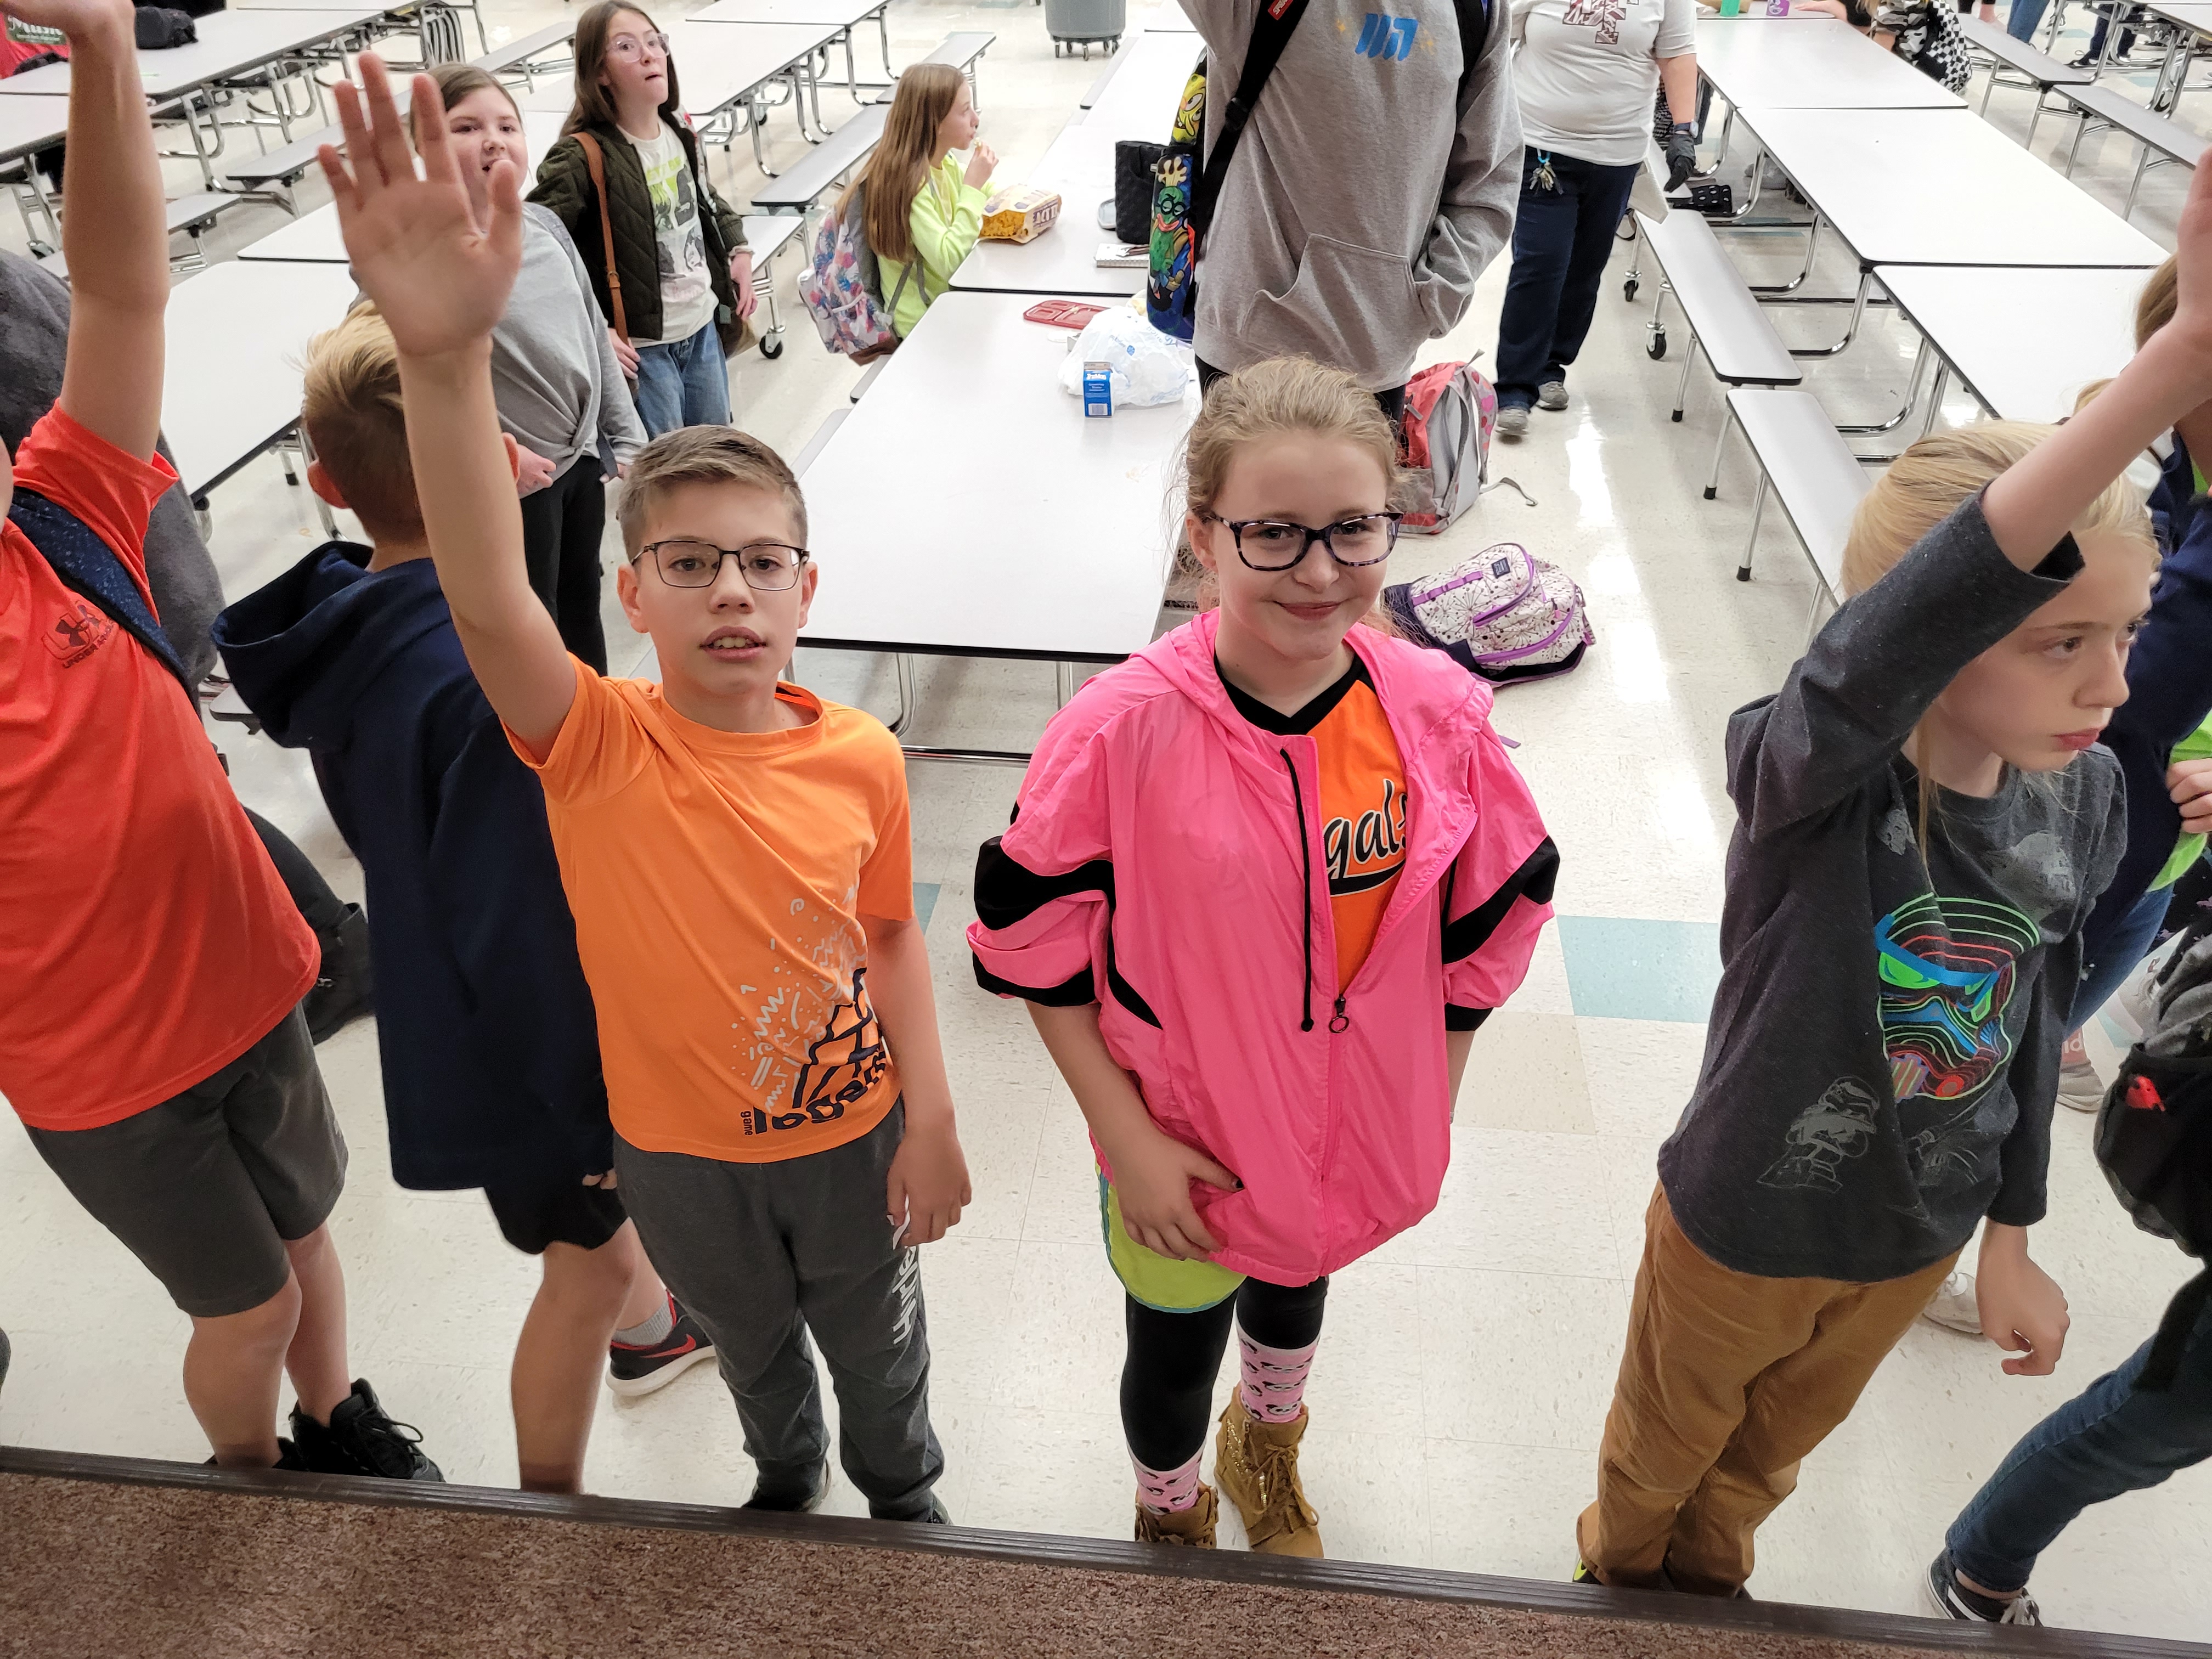 Students celebrate Hope Week by wearing bright colors